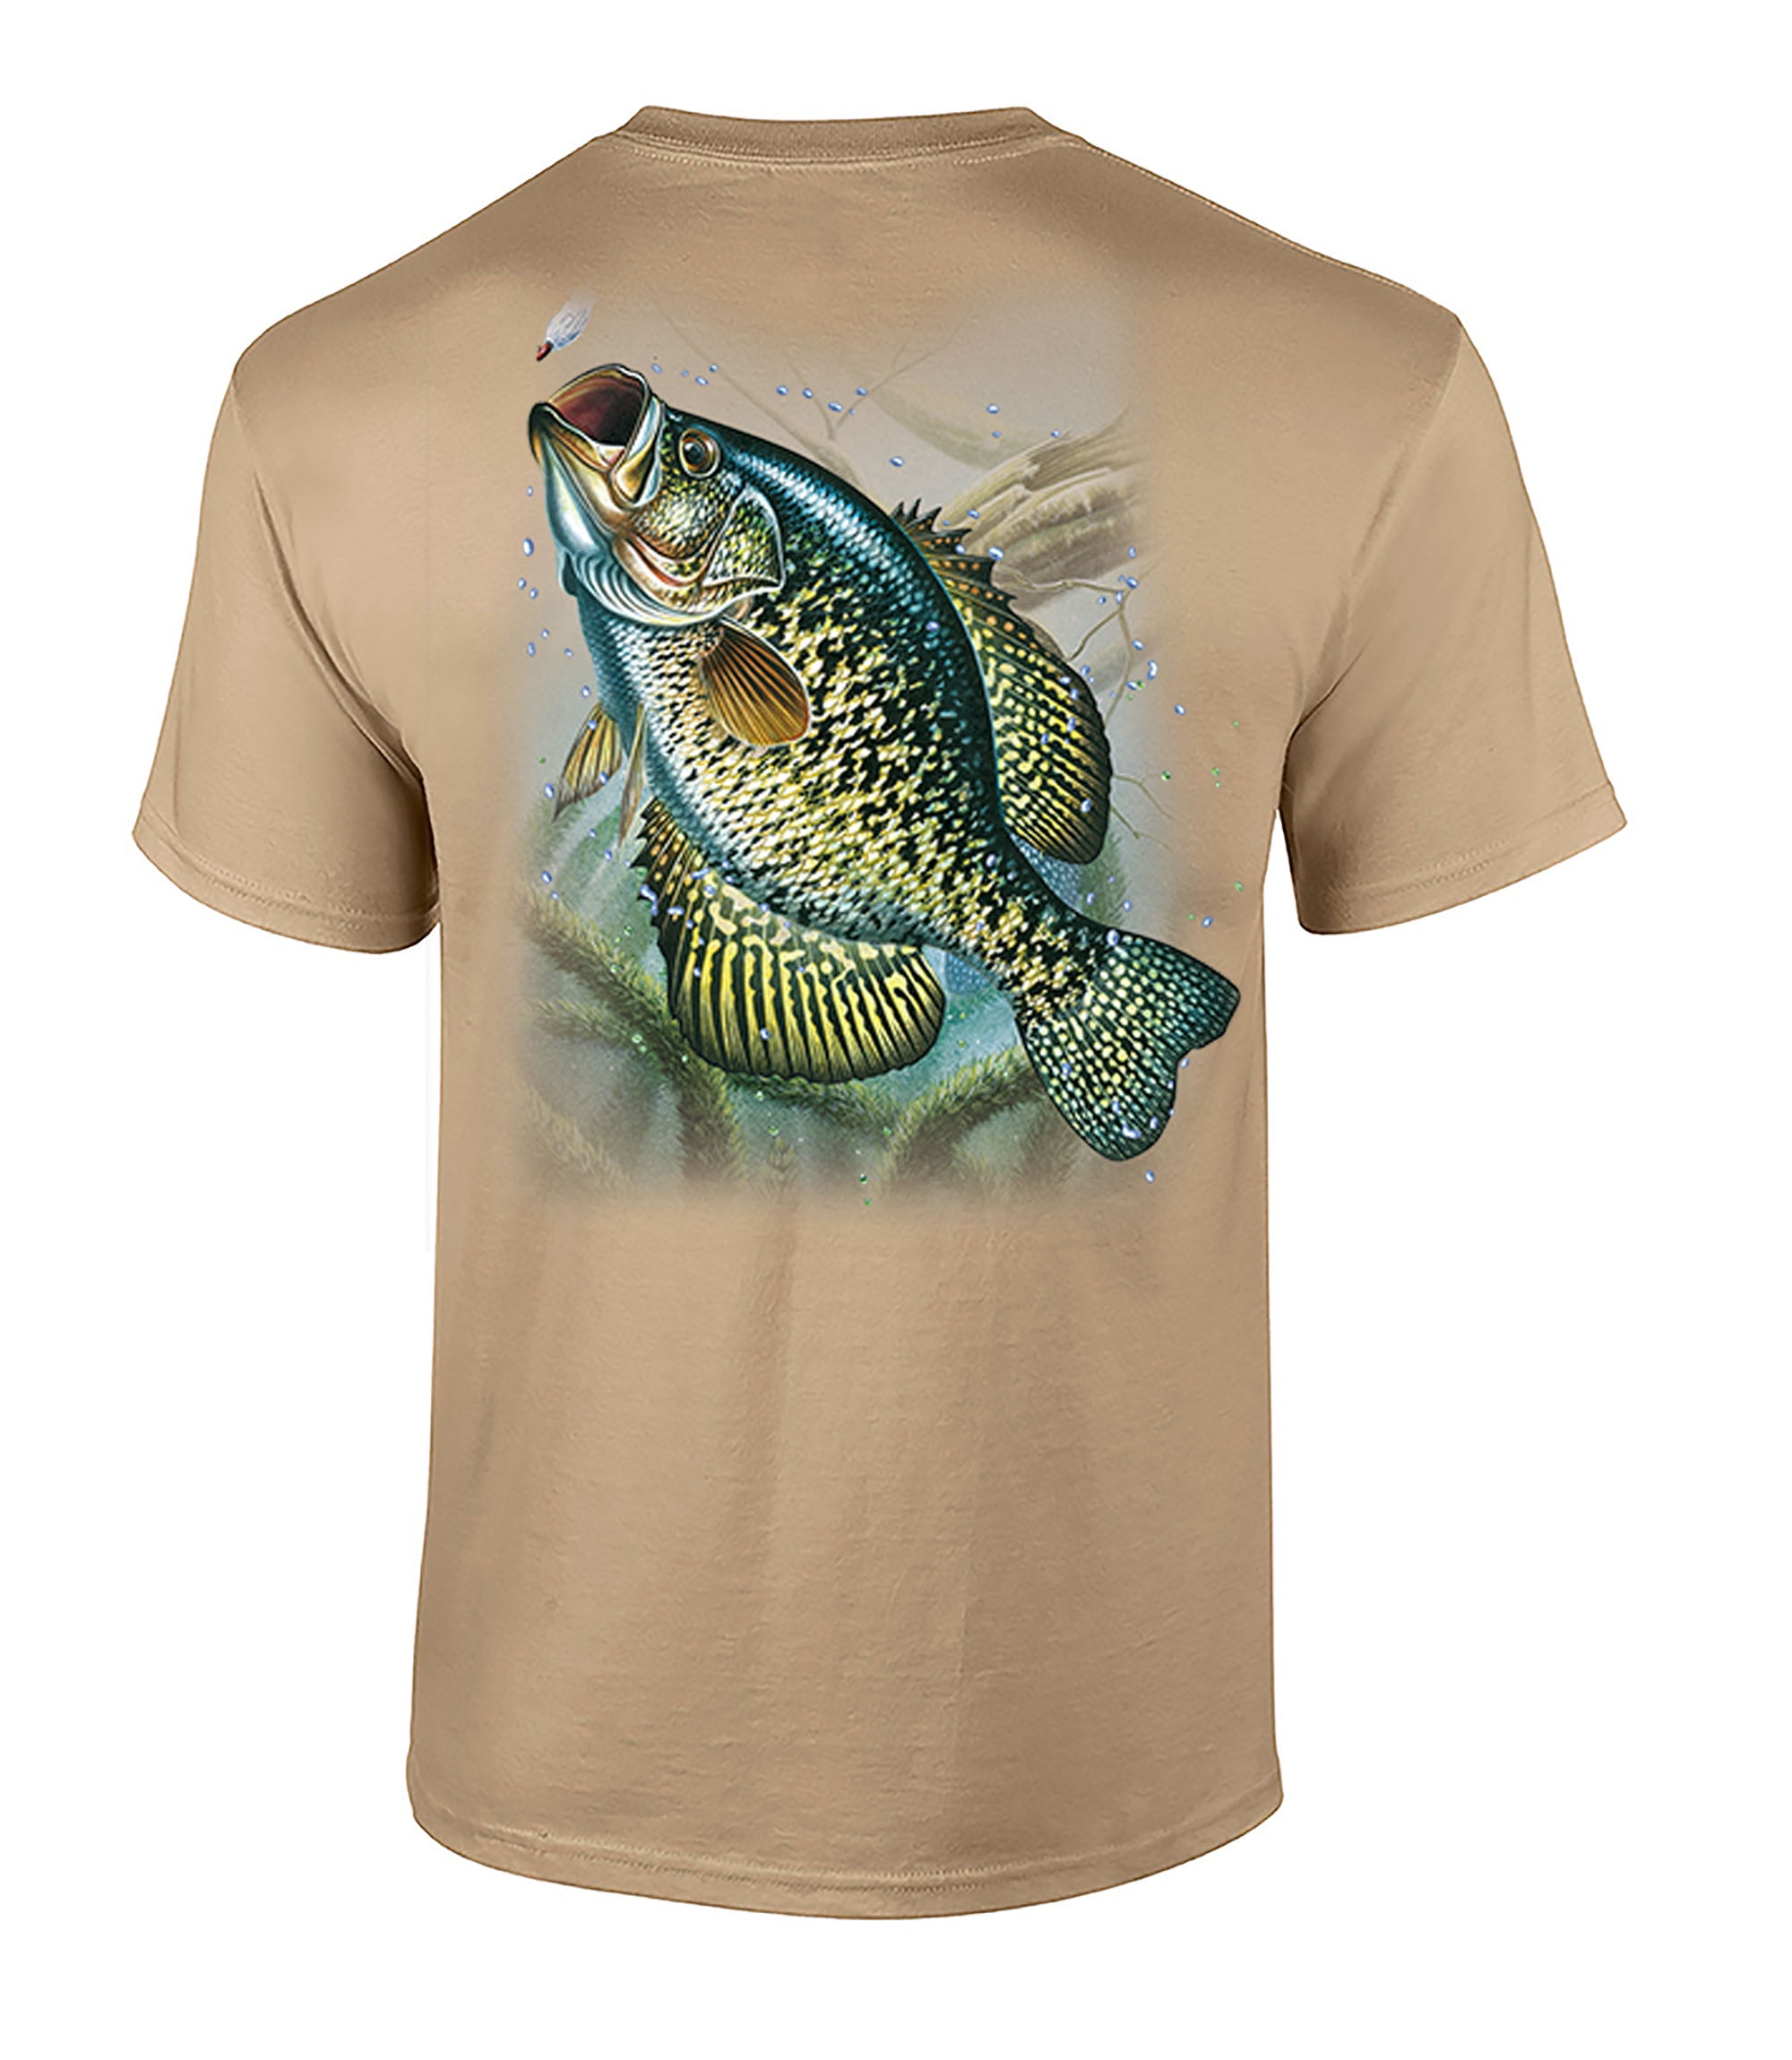 Fishing Action Crappie Adult Short Sleeve T-Shirt-Tan-4XL 